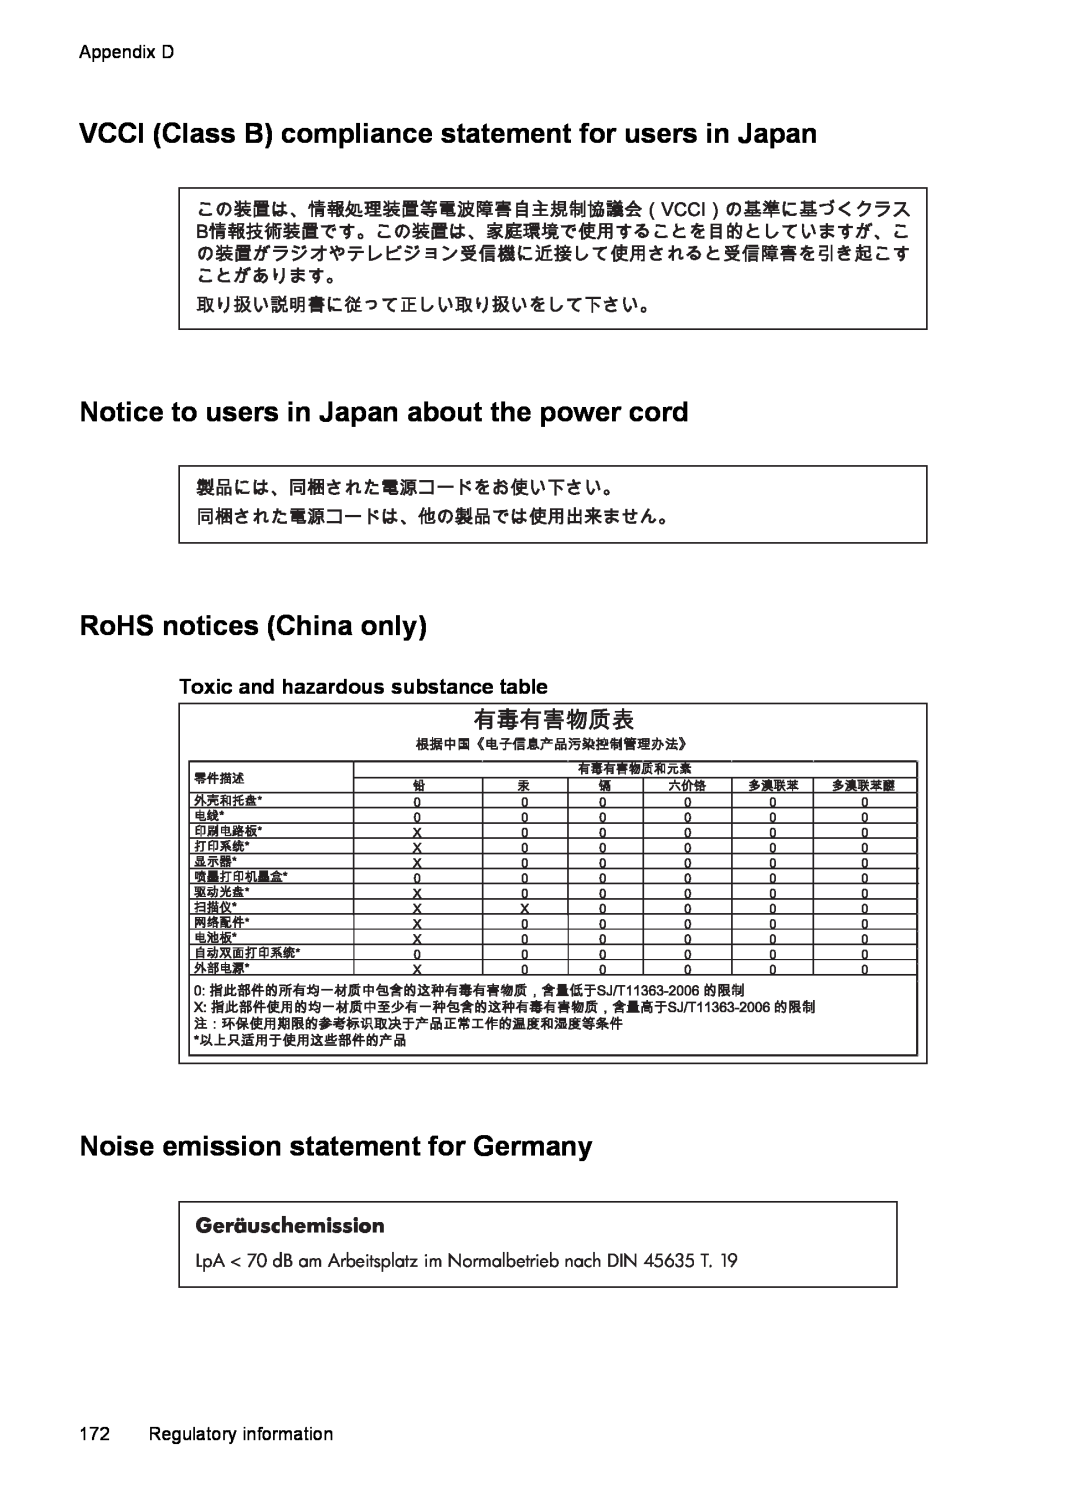 HP J4660 VCCI Class B compliance statement for users in Japan, Noise emission statement for Germany, Geräuschemission 